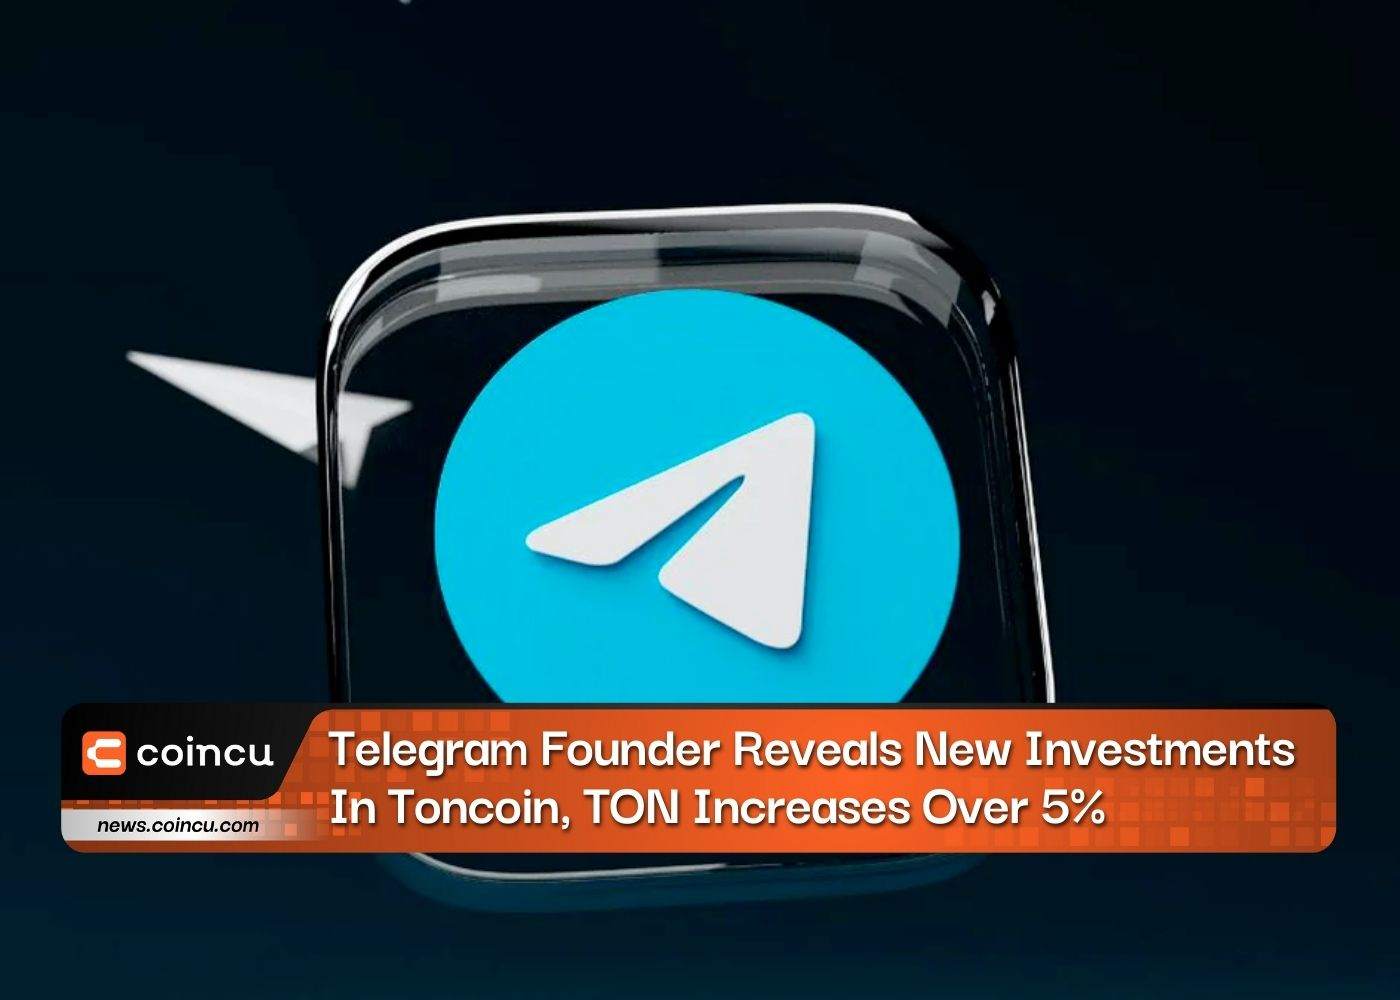 Telegram Founder Reveals New Investments In Toncoin, TON Increases Over 5%